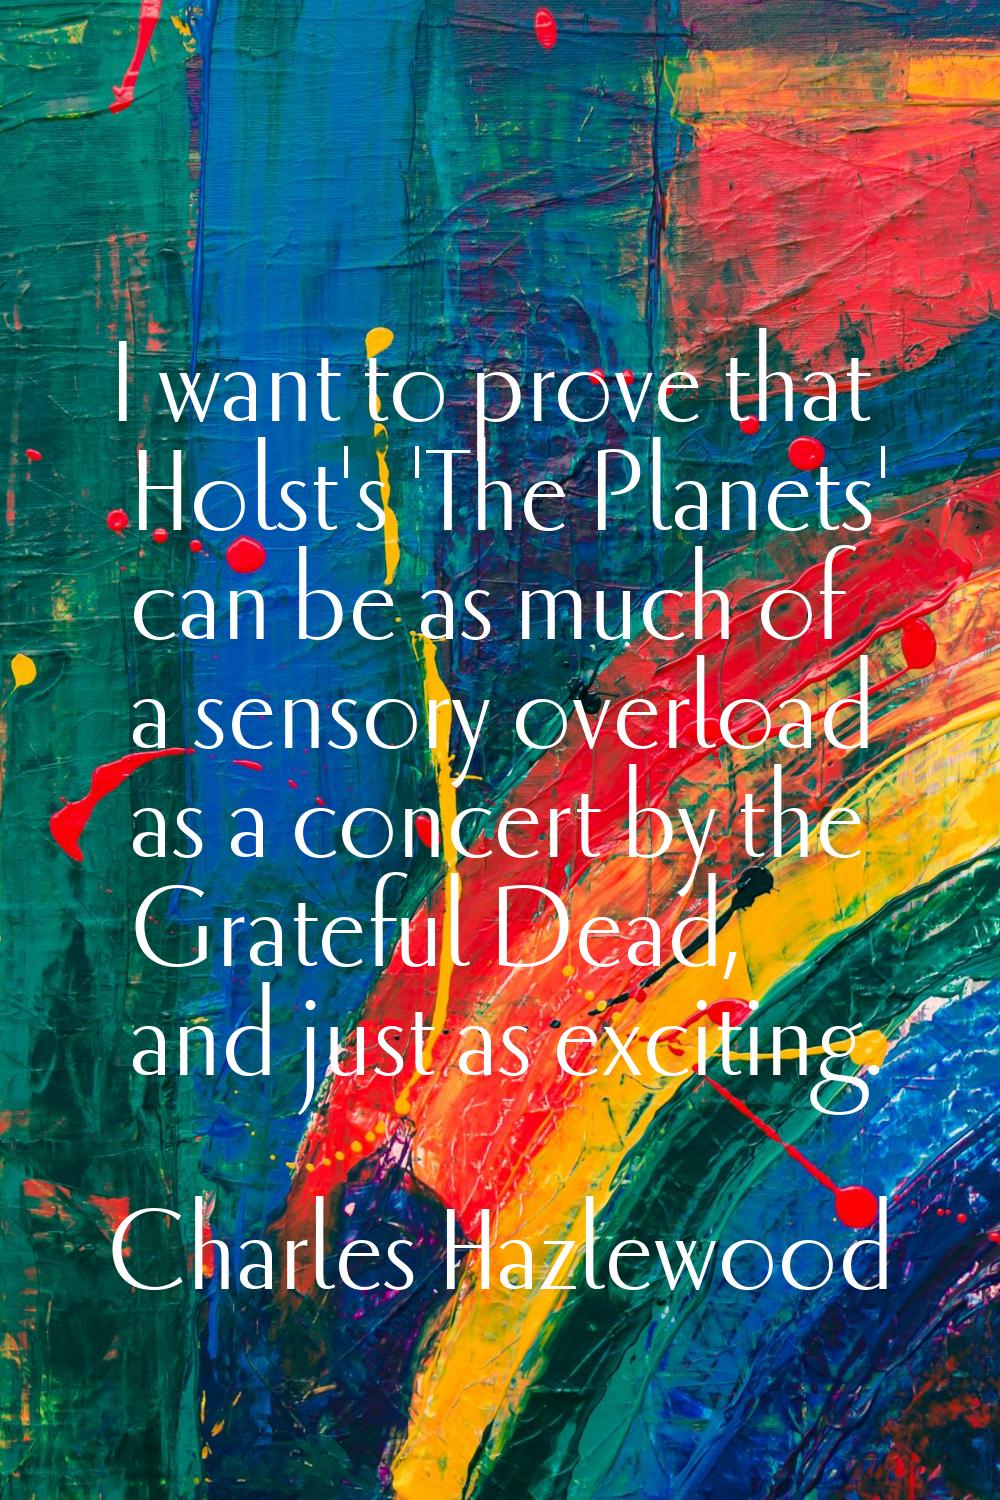 I want to prove that Holst's 'The Planets' can be as much of a sensory overload as a concert by the